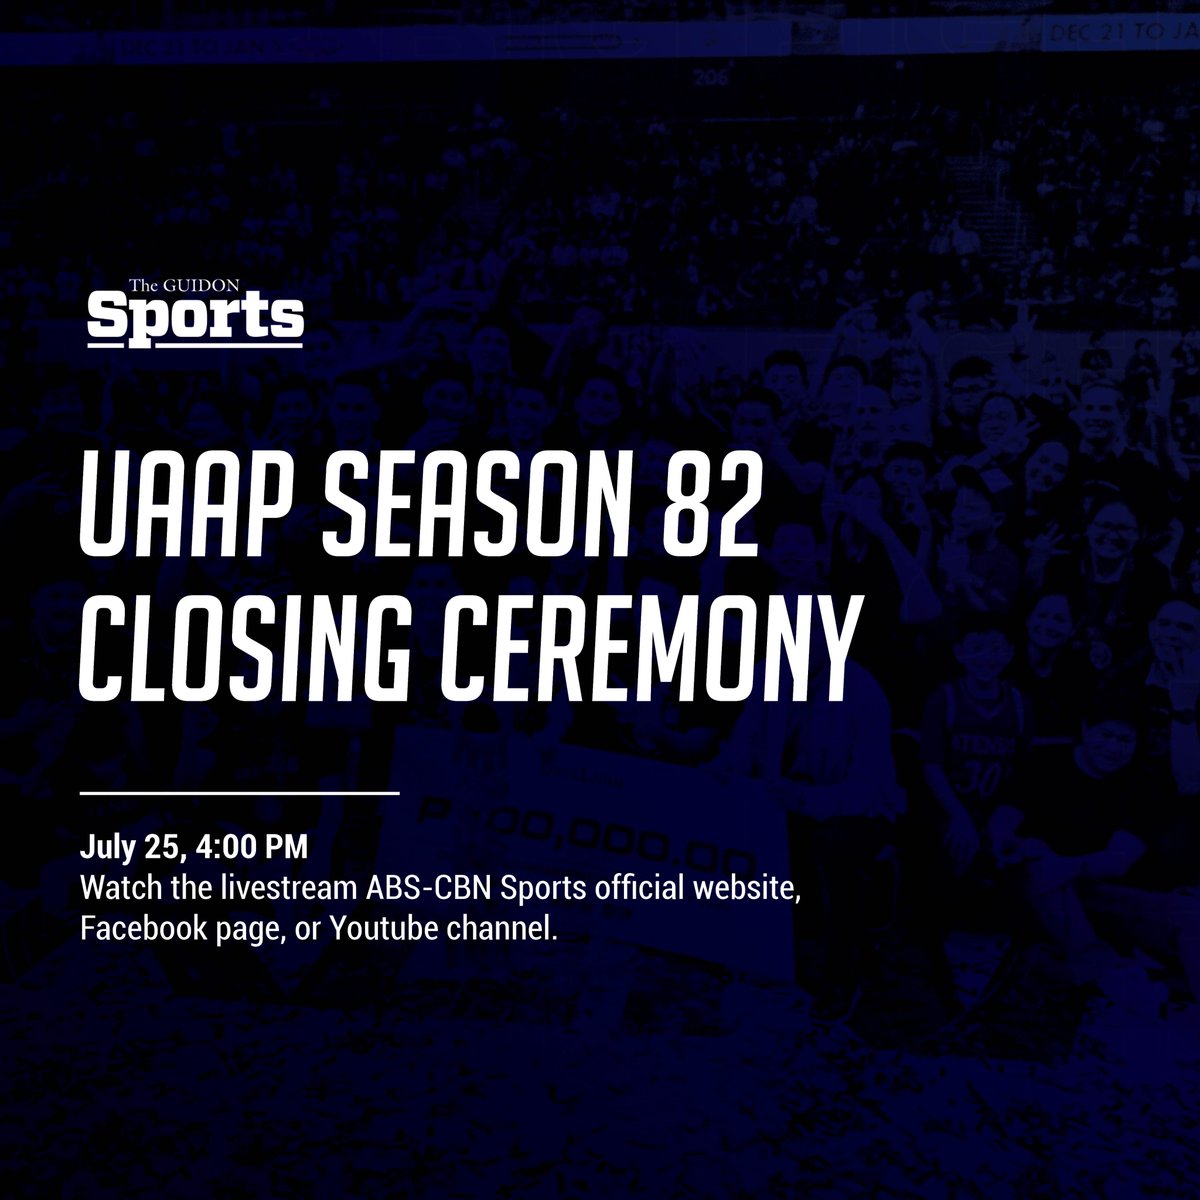 LOOK: The UAAP Season 82 Closing Ceremony will be held on Saturday, July 25, at 4 PM. Catch the livestream on the ABS-CBN Sports official website, Facebook page, or YouTube channel. #UAAPClosingCeremony